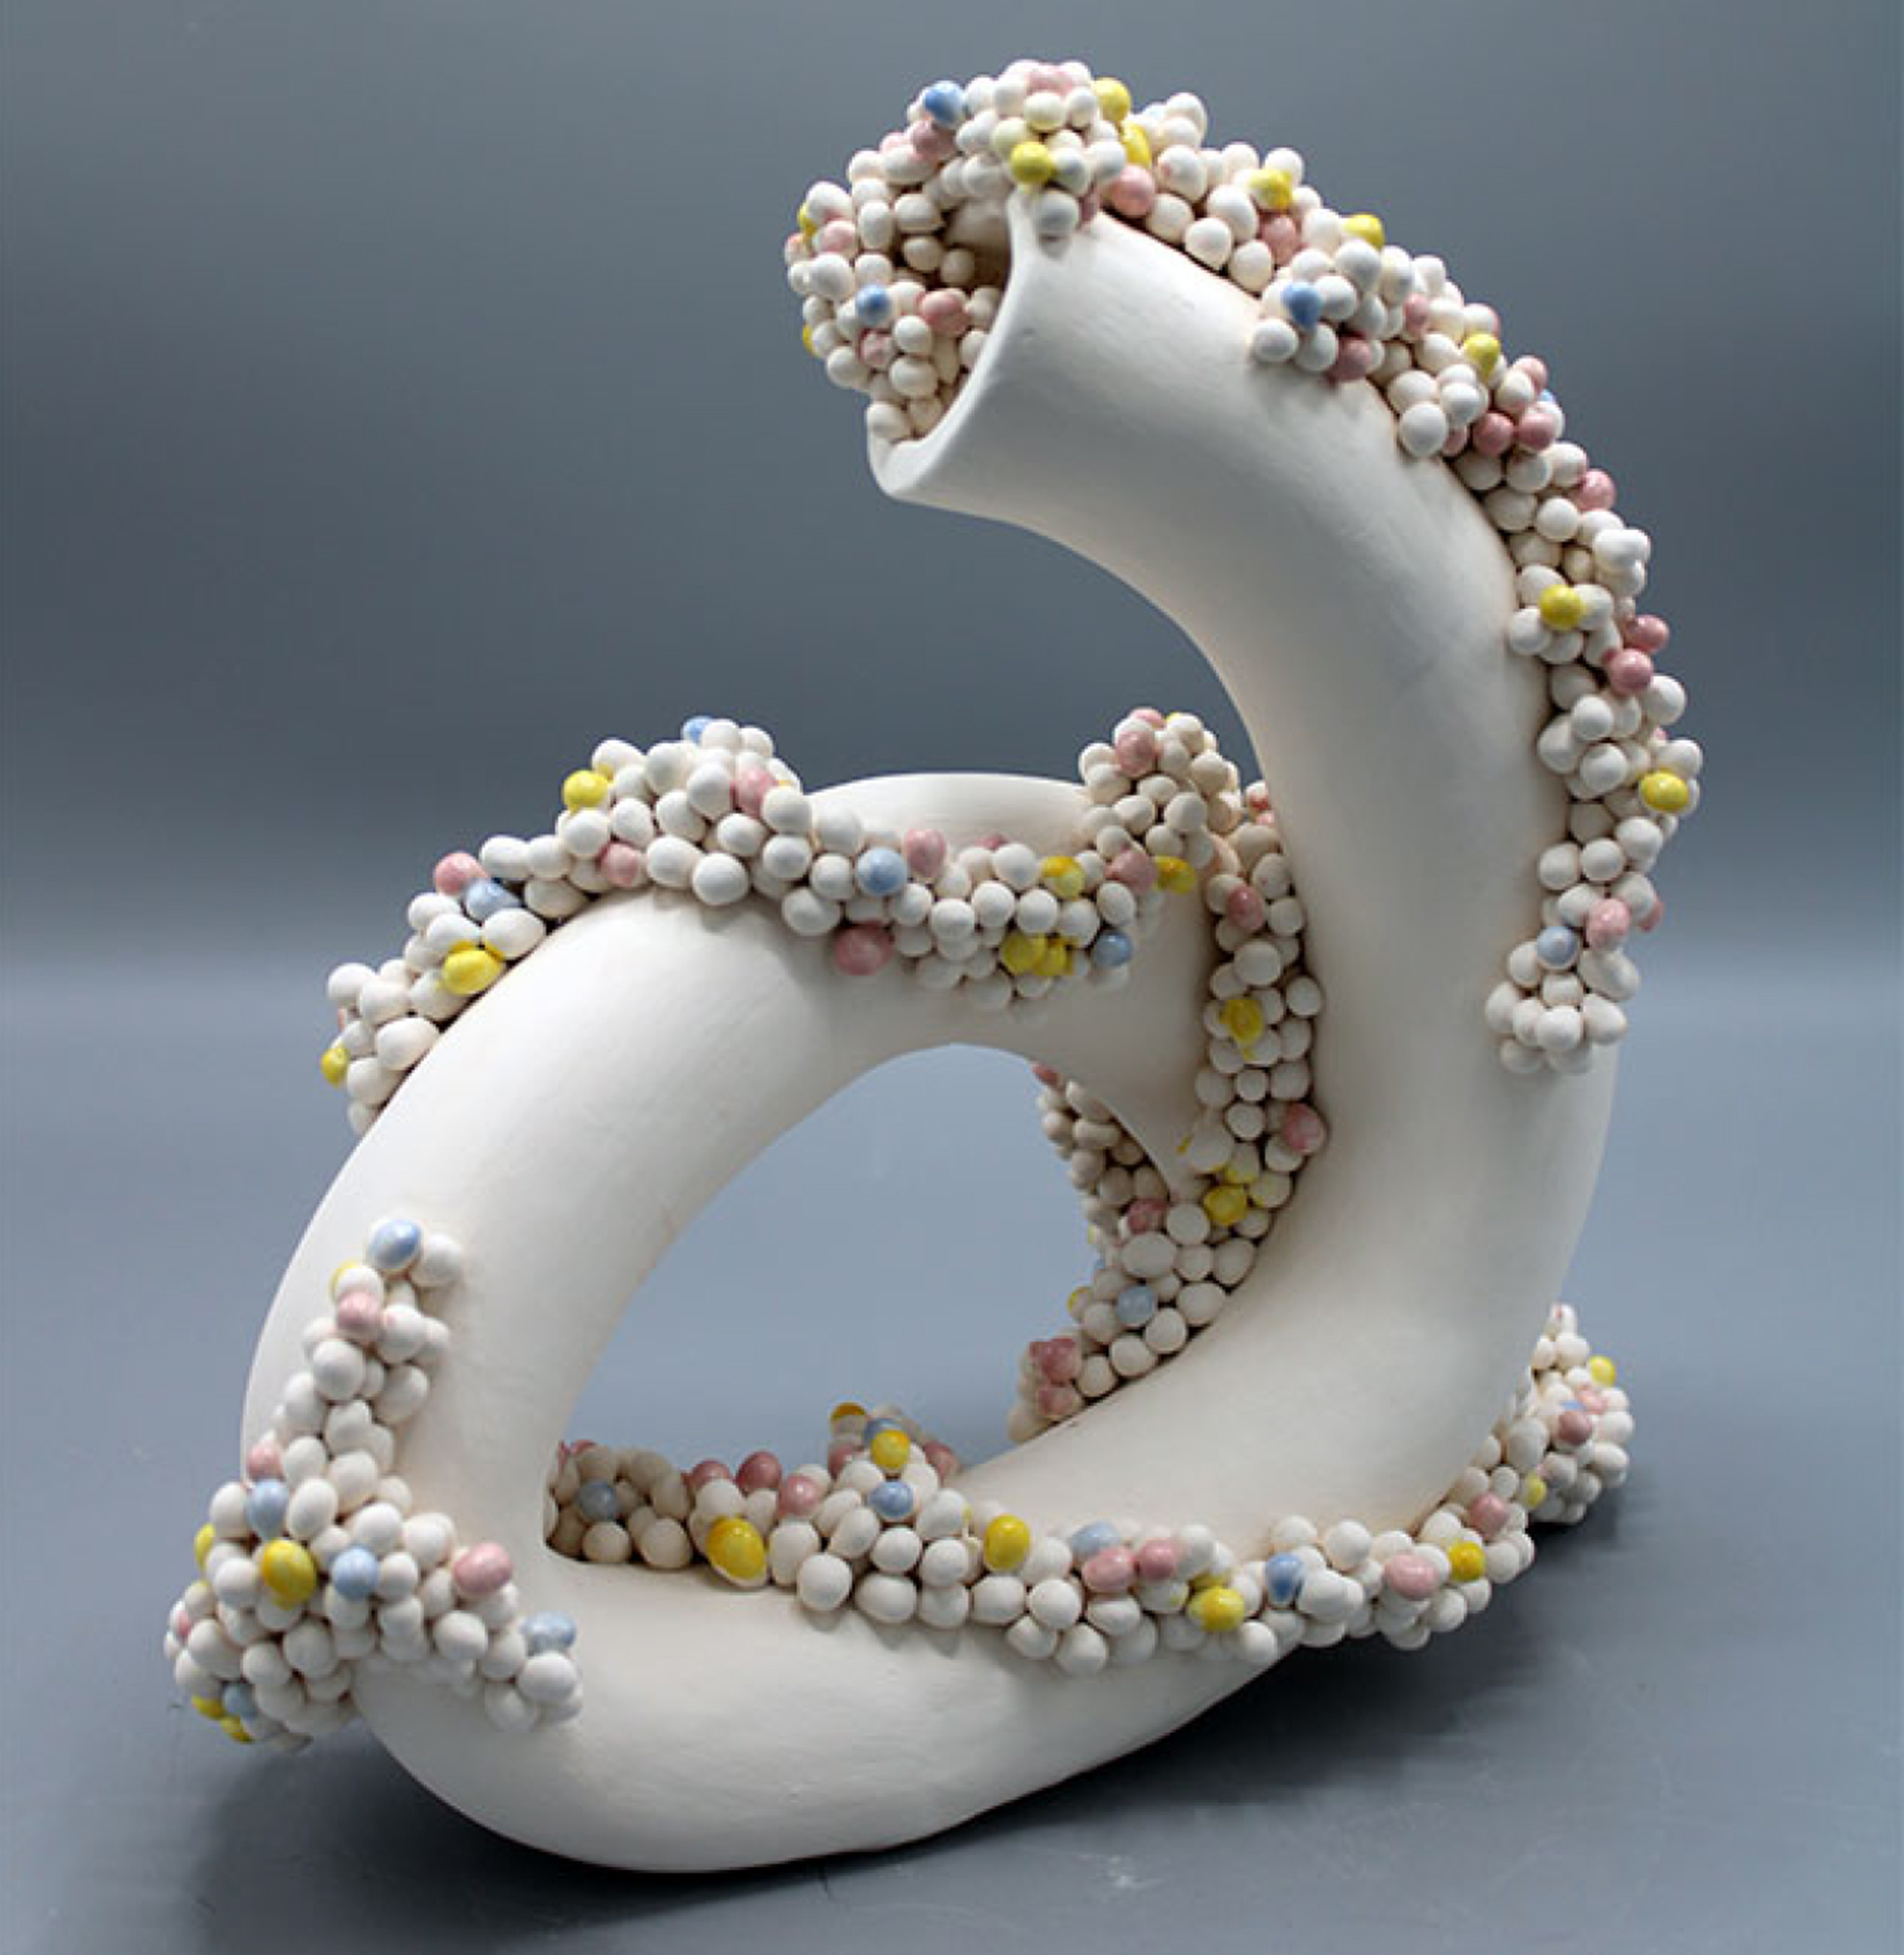 white tubular sculpture with small pastel colored spheres running up it